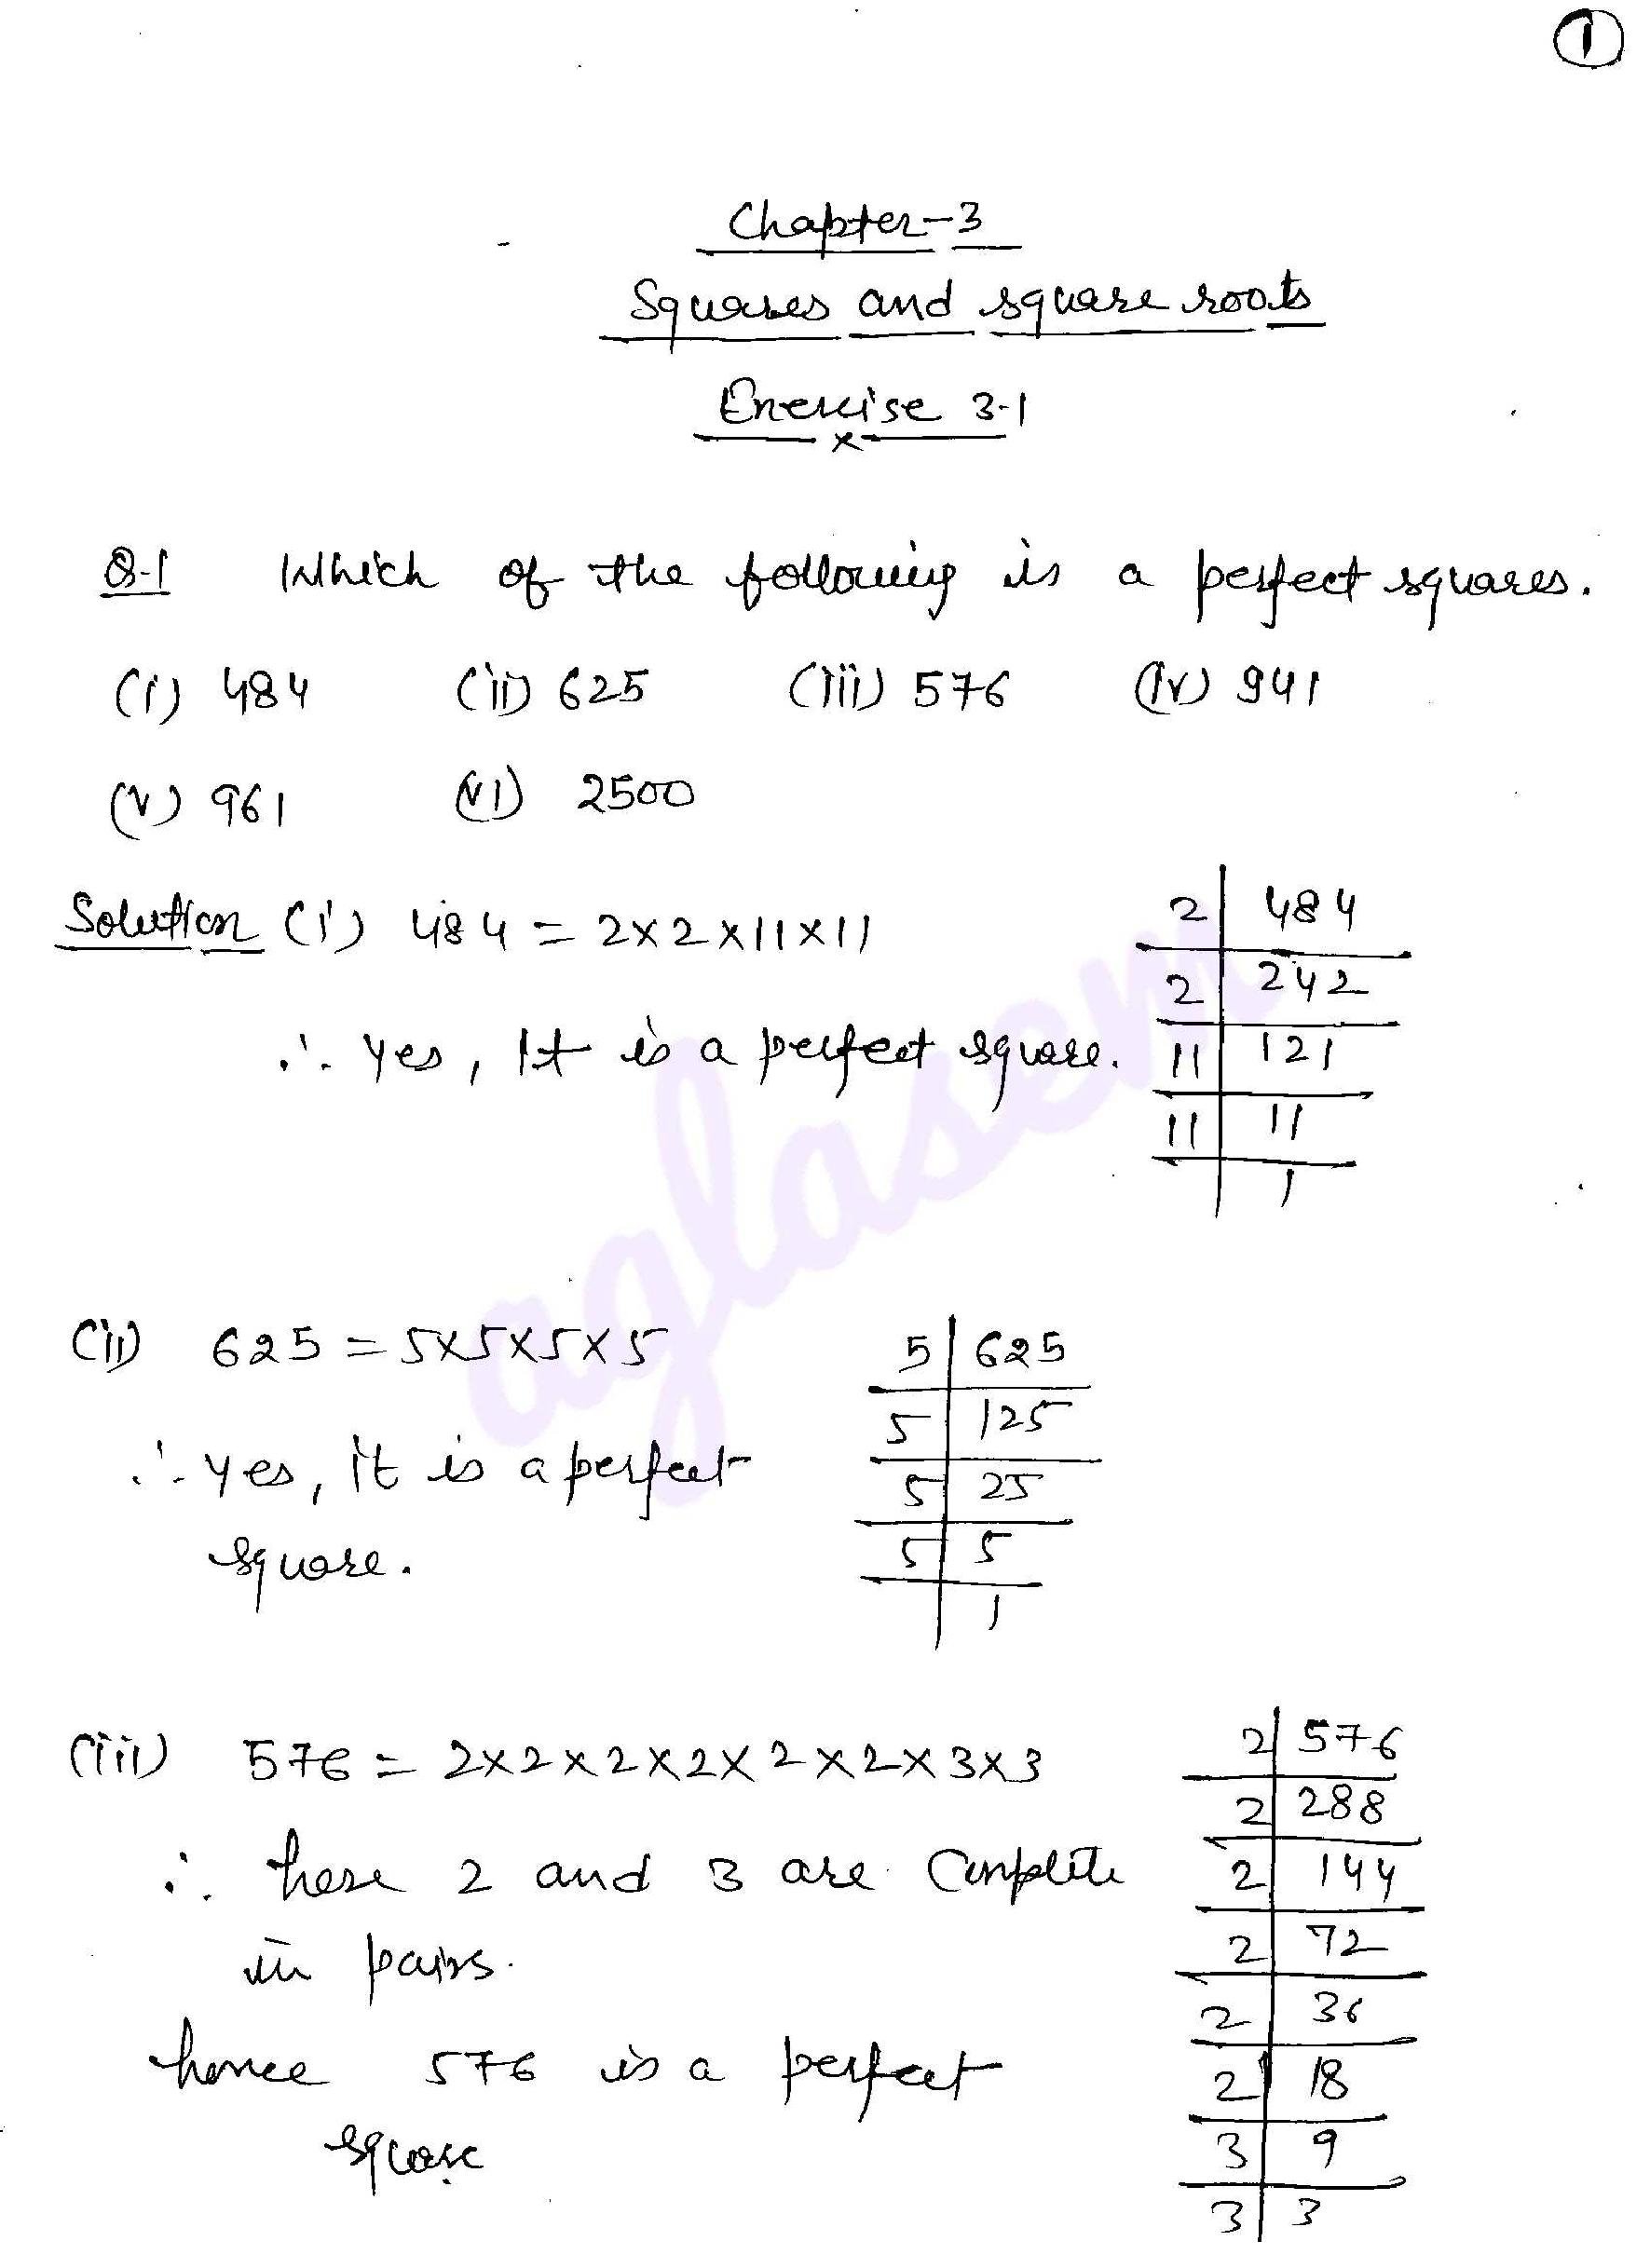 RD Sharma Solutions Class 8 Chapter 3 Squares and Square Roots Exercise 3.1 - Page 1